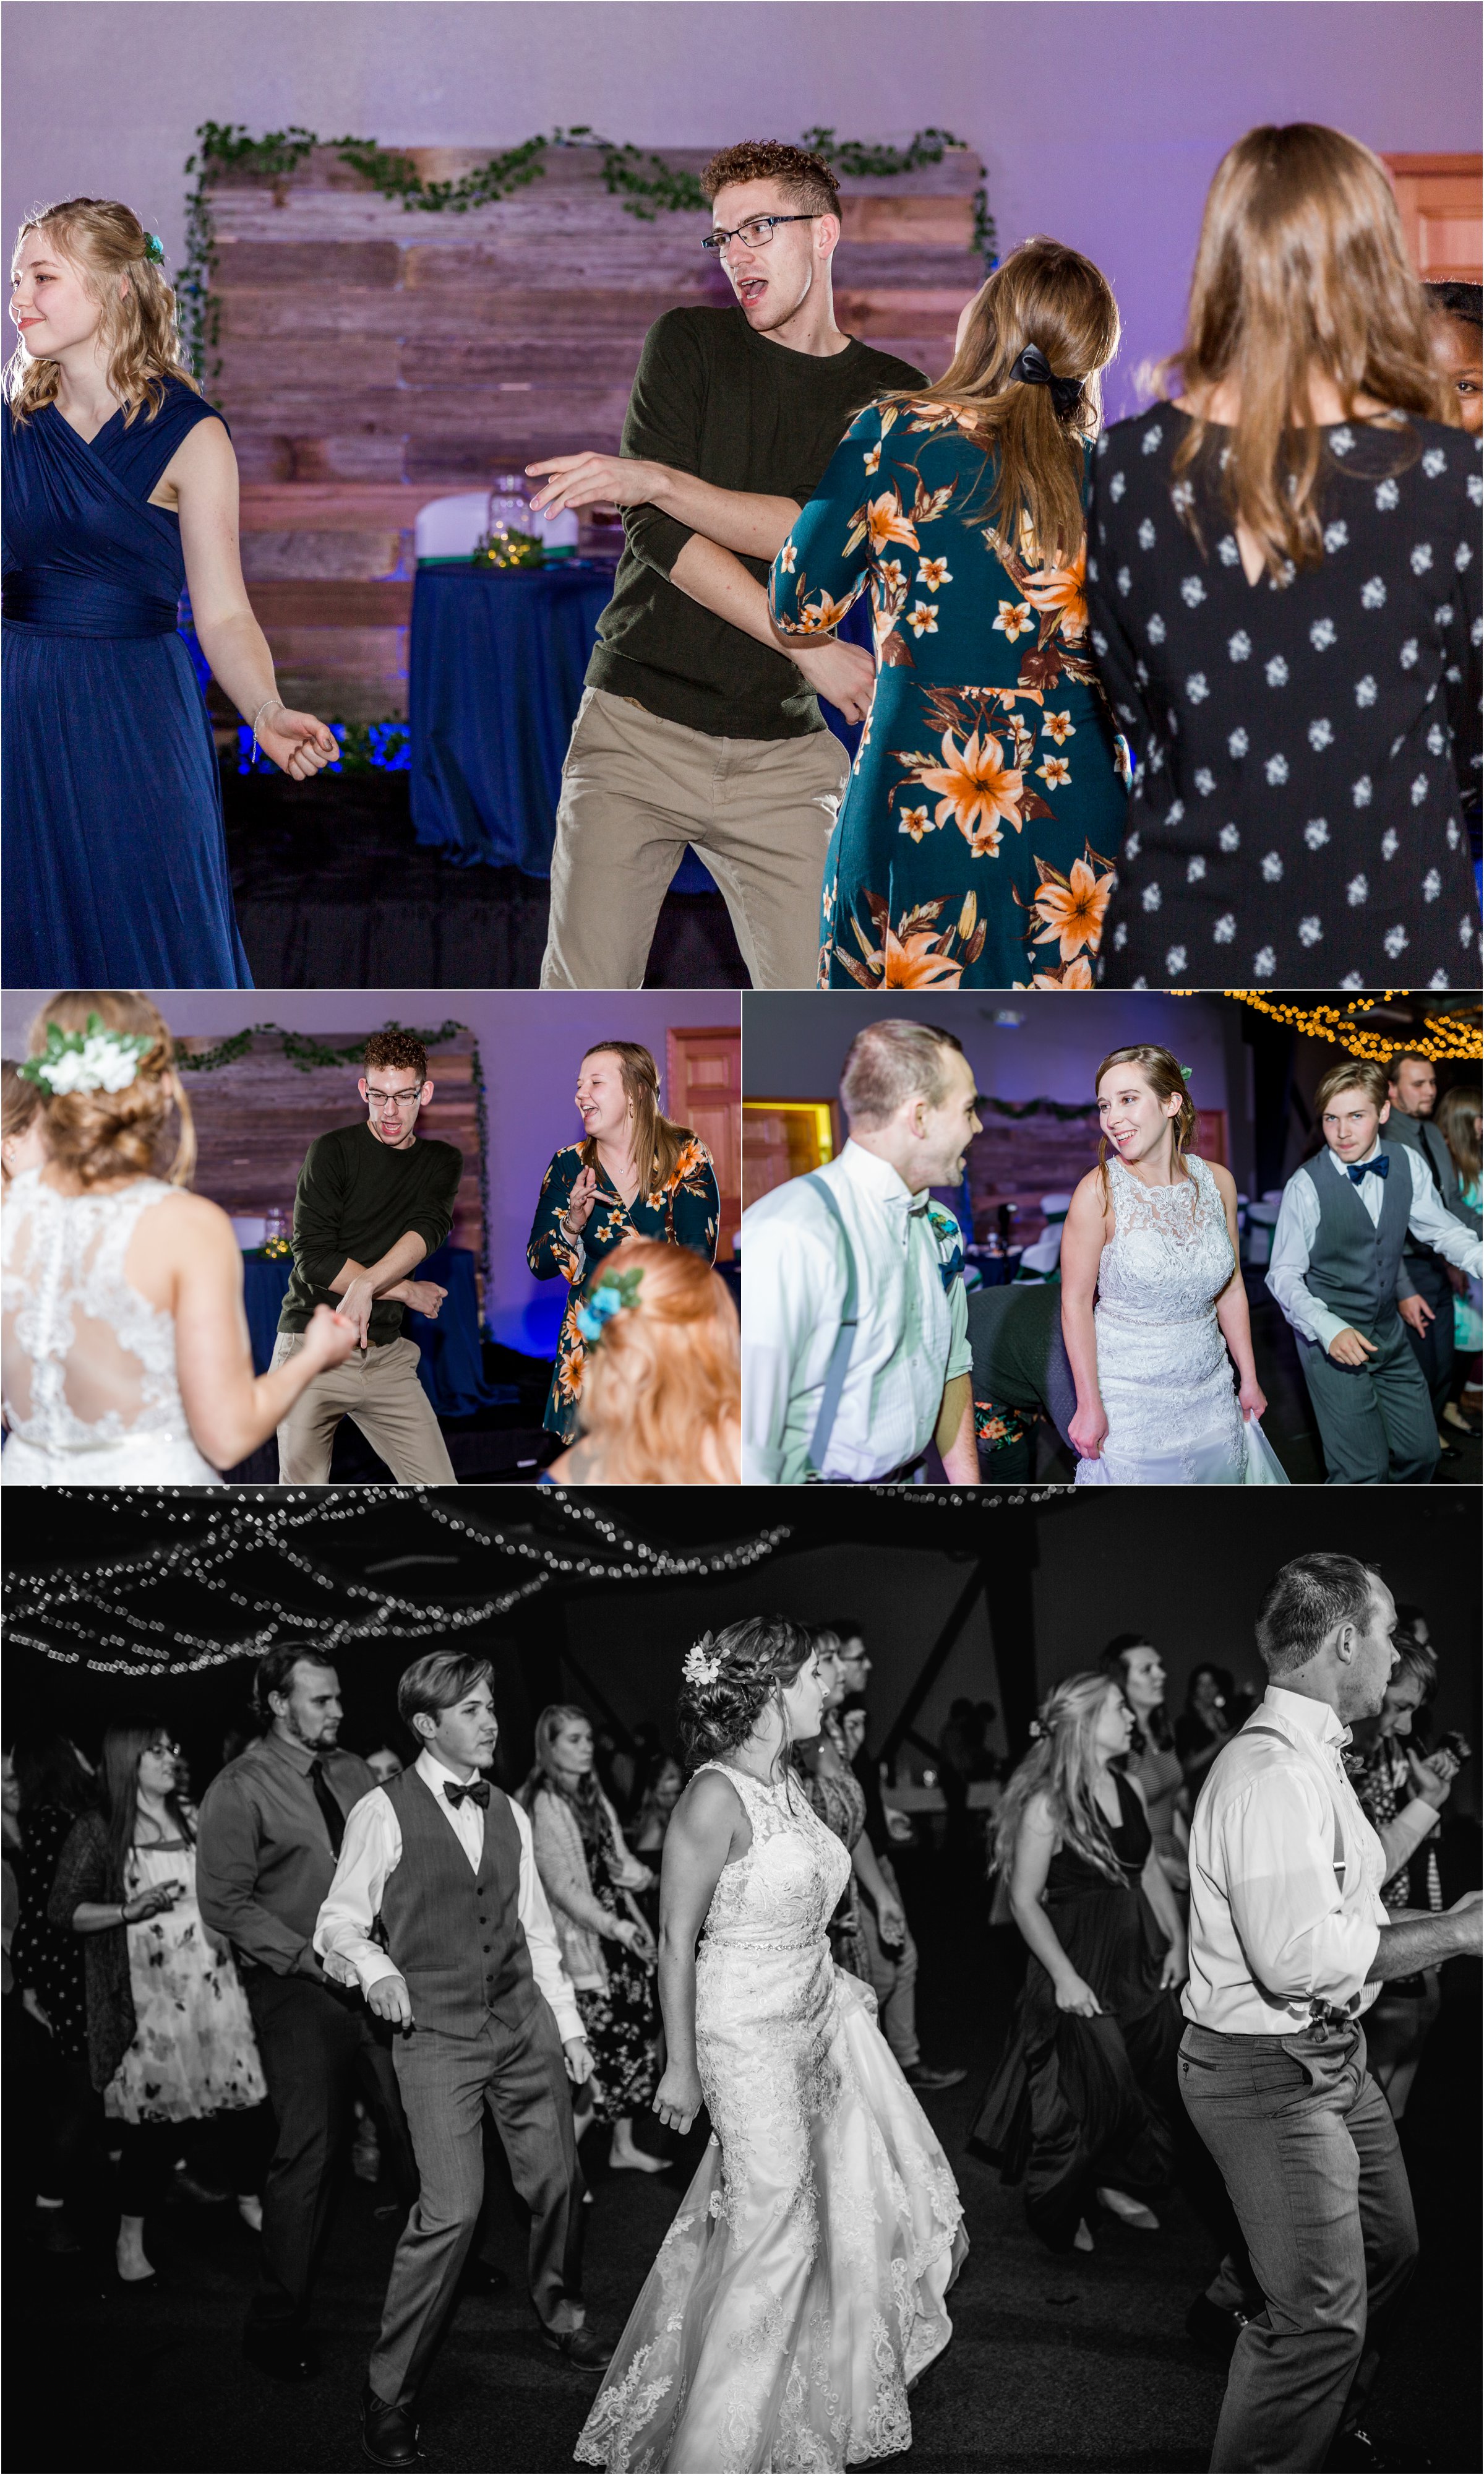 bride and groom dancing with their guests at their wedding reception